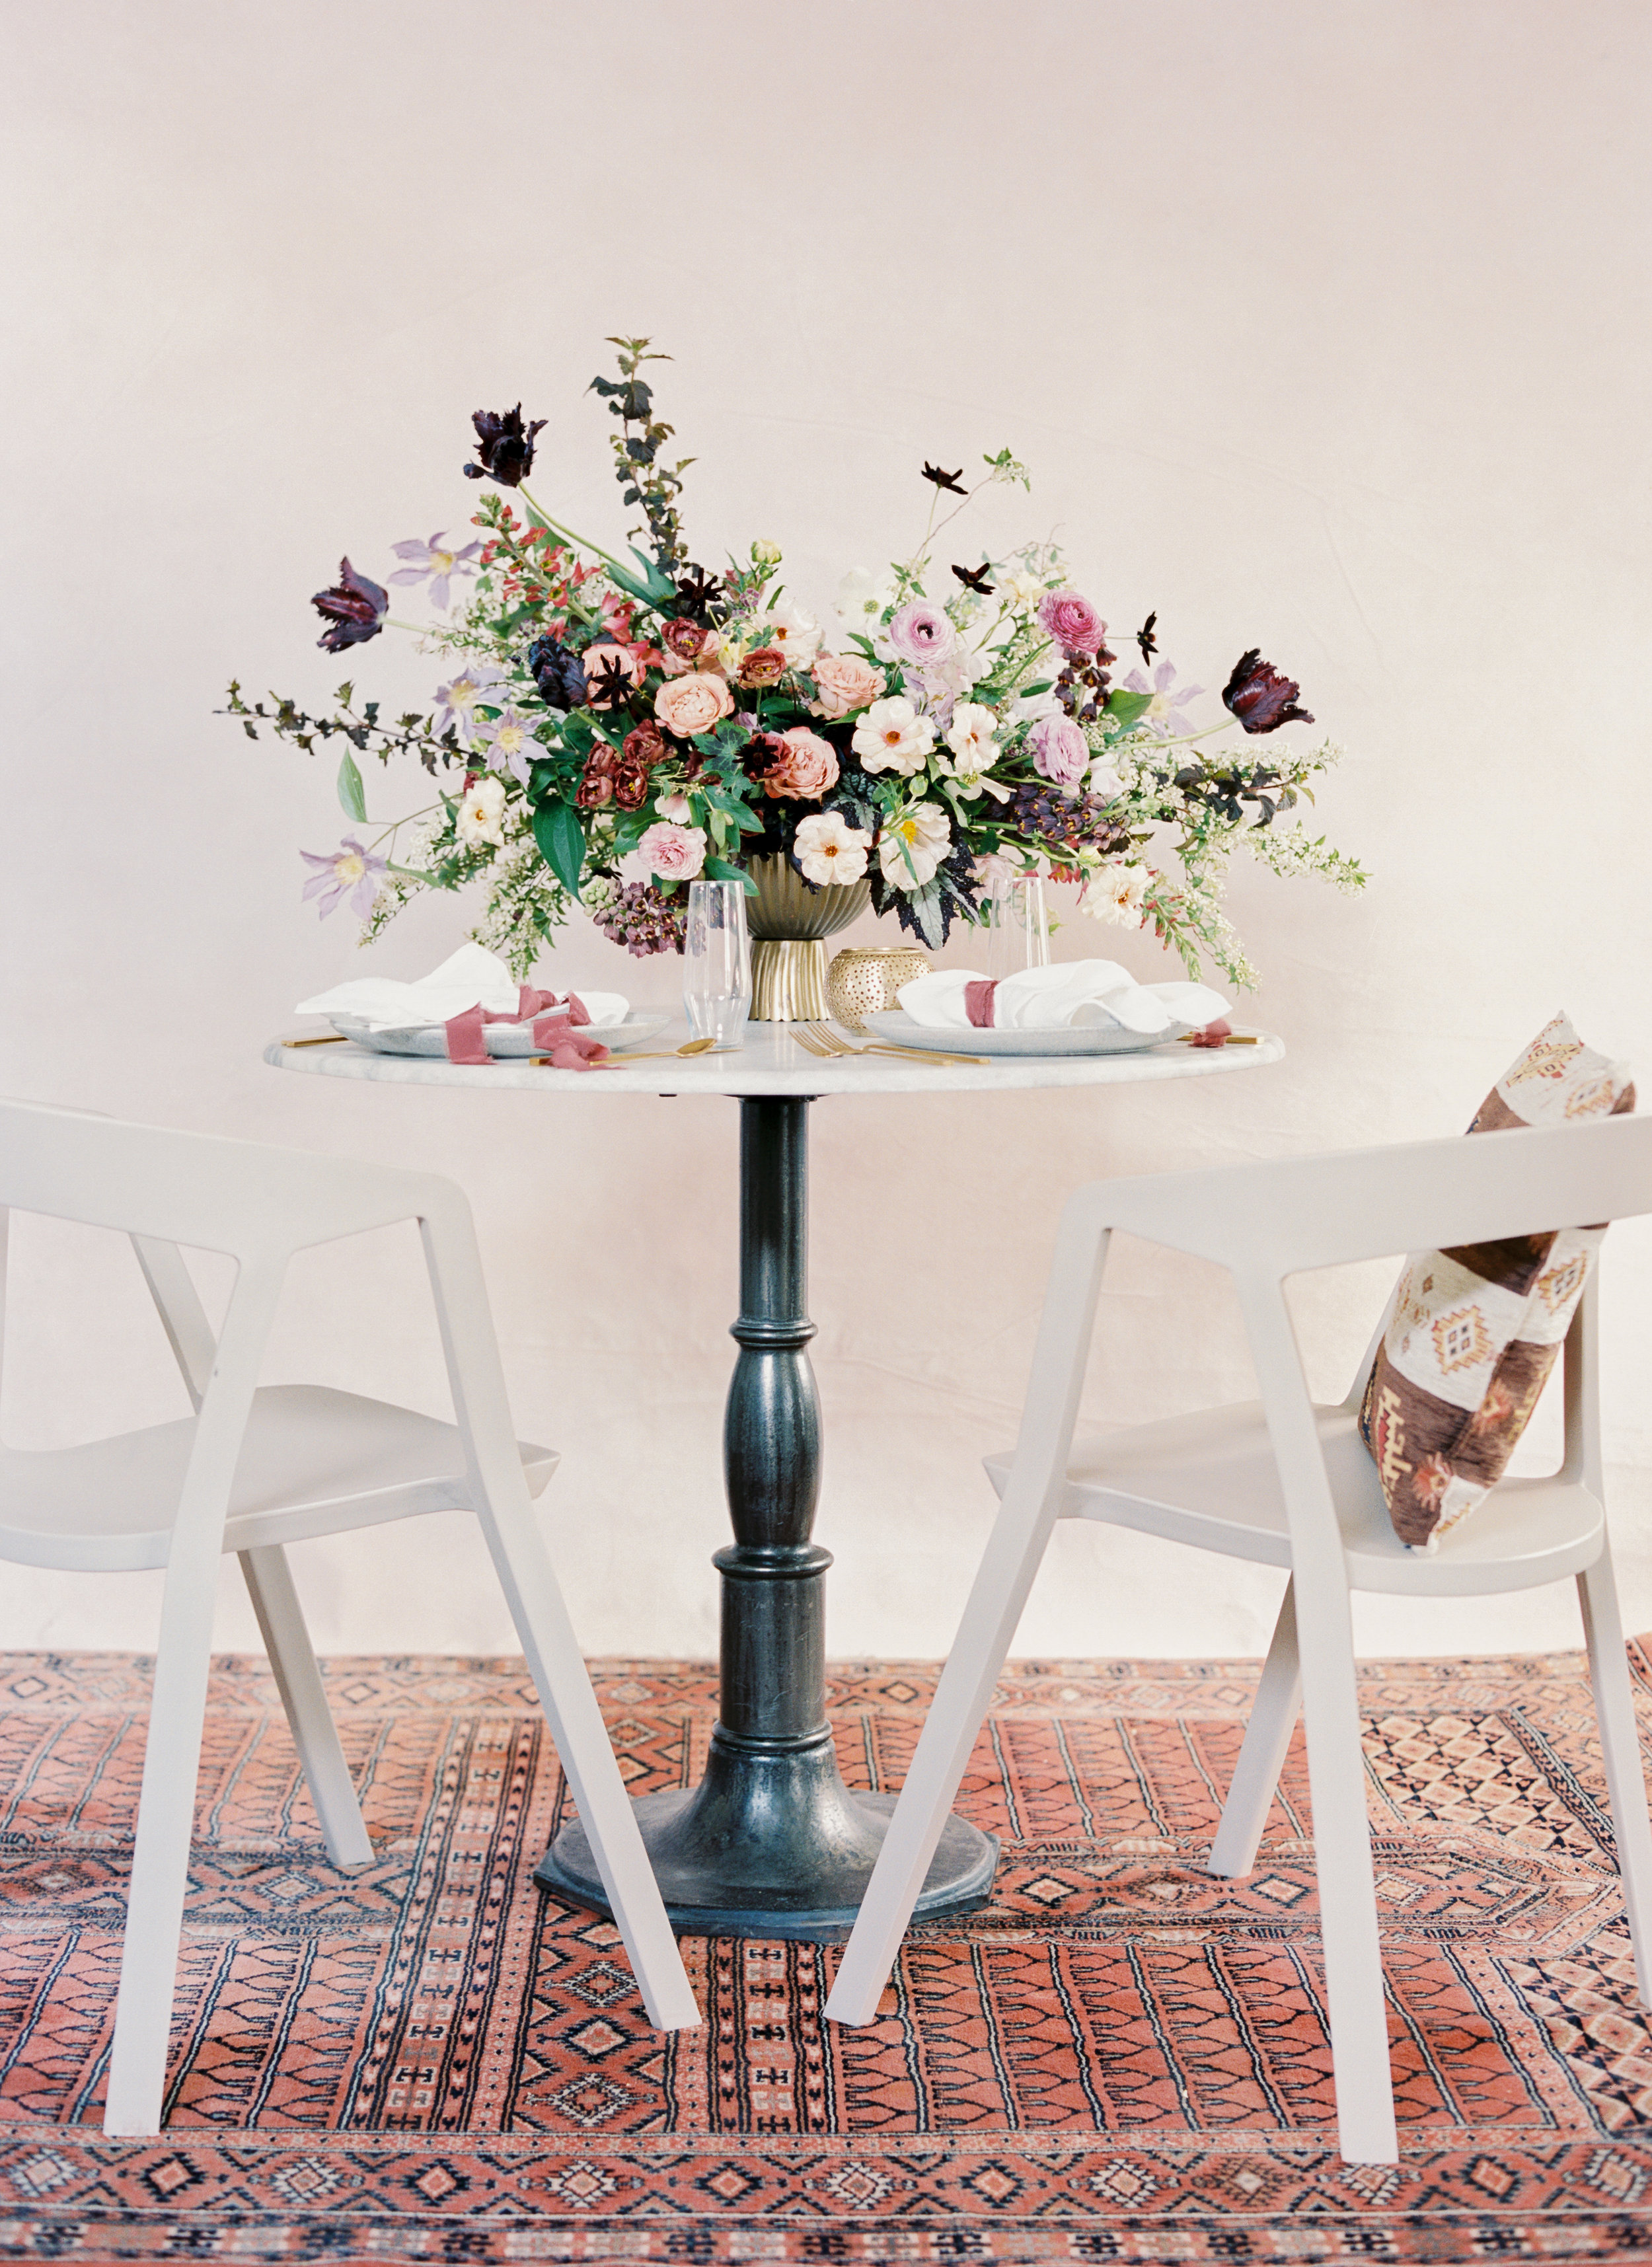 Moroccan rug, marble table, and flowers in shades of mauve, terra cotta, and eggplant. April wedding color palette by Nashville floral designer, Rosemary and Finch.